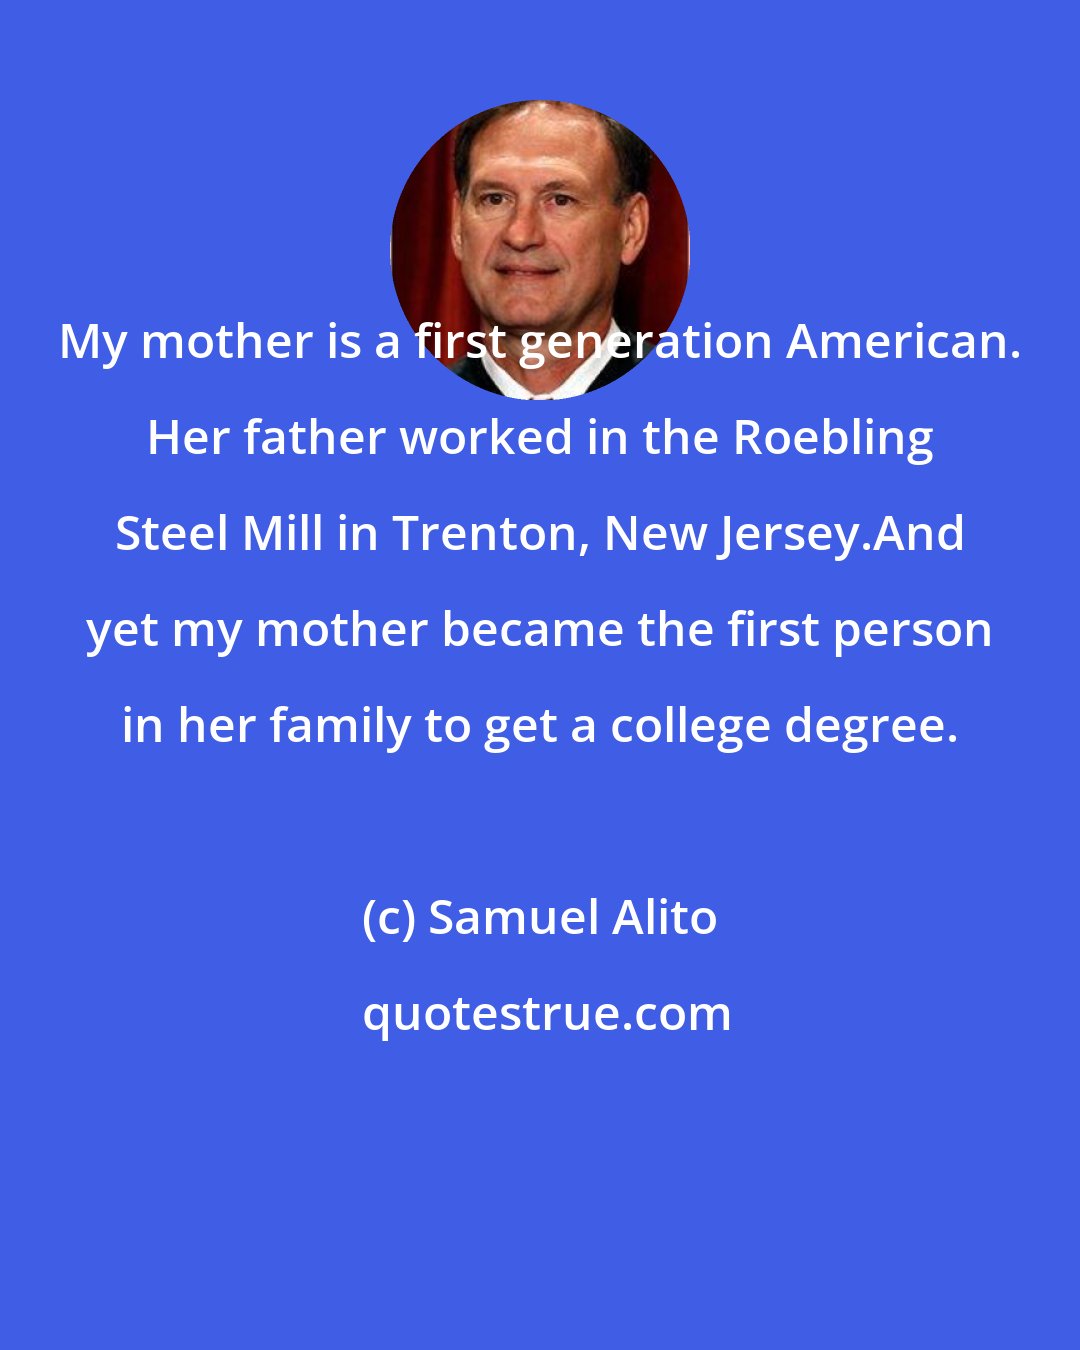 Samuel Alito: My mother is a first generation American. Her father worked in the Roebling Steel Mill in Trenton, New Jersey.And yet my mother became the first person in her family to get a college degree.